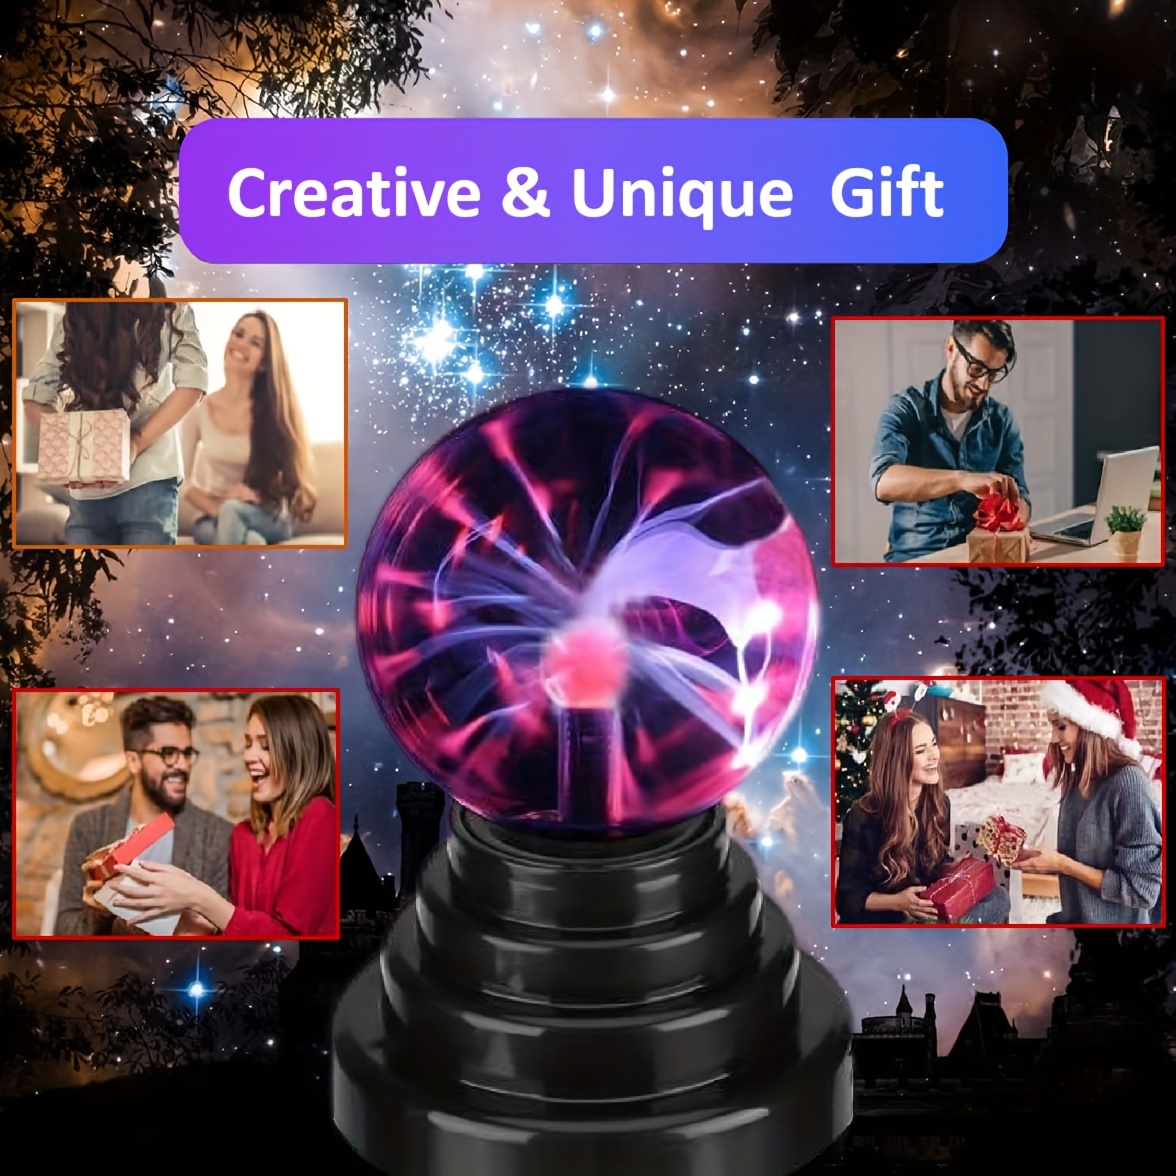 plasma ball light lamp touch sensitive usb powered magic static electricity for parties home decorations birthday gifts science teaching